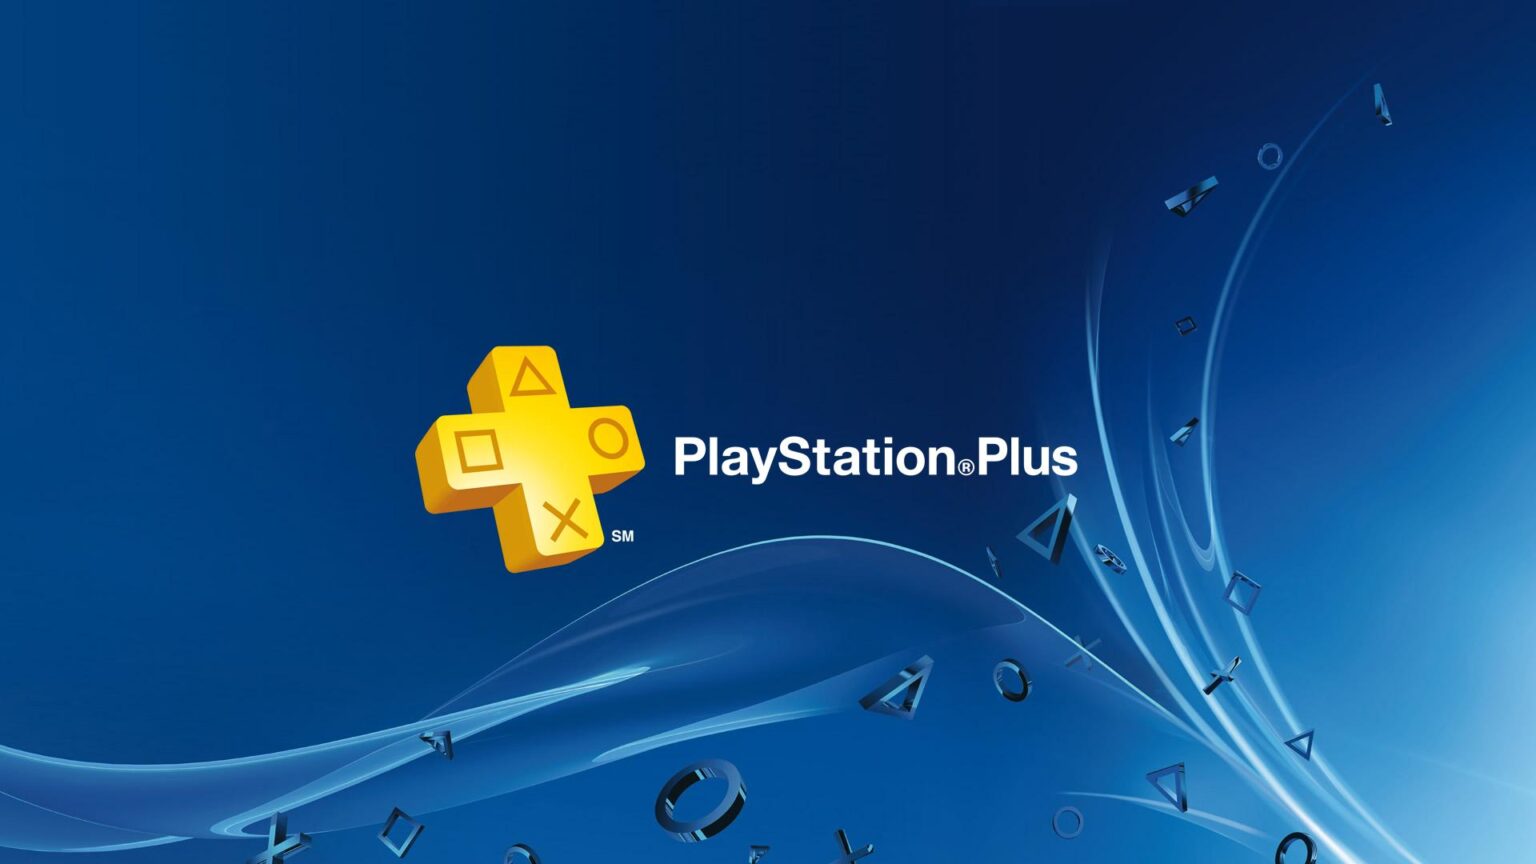 Playstation Plus Games For March 2022 Announced featured image